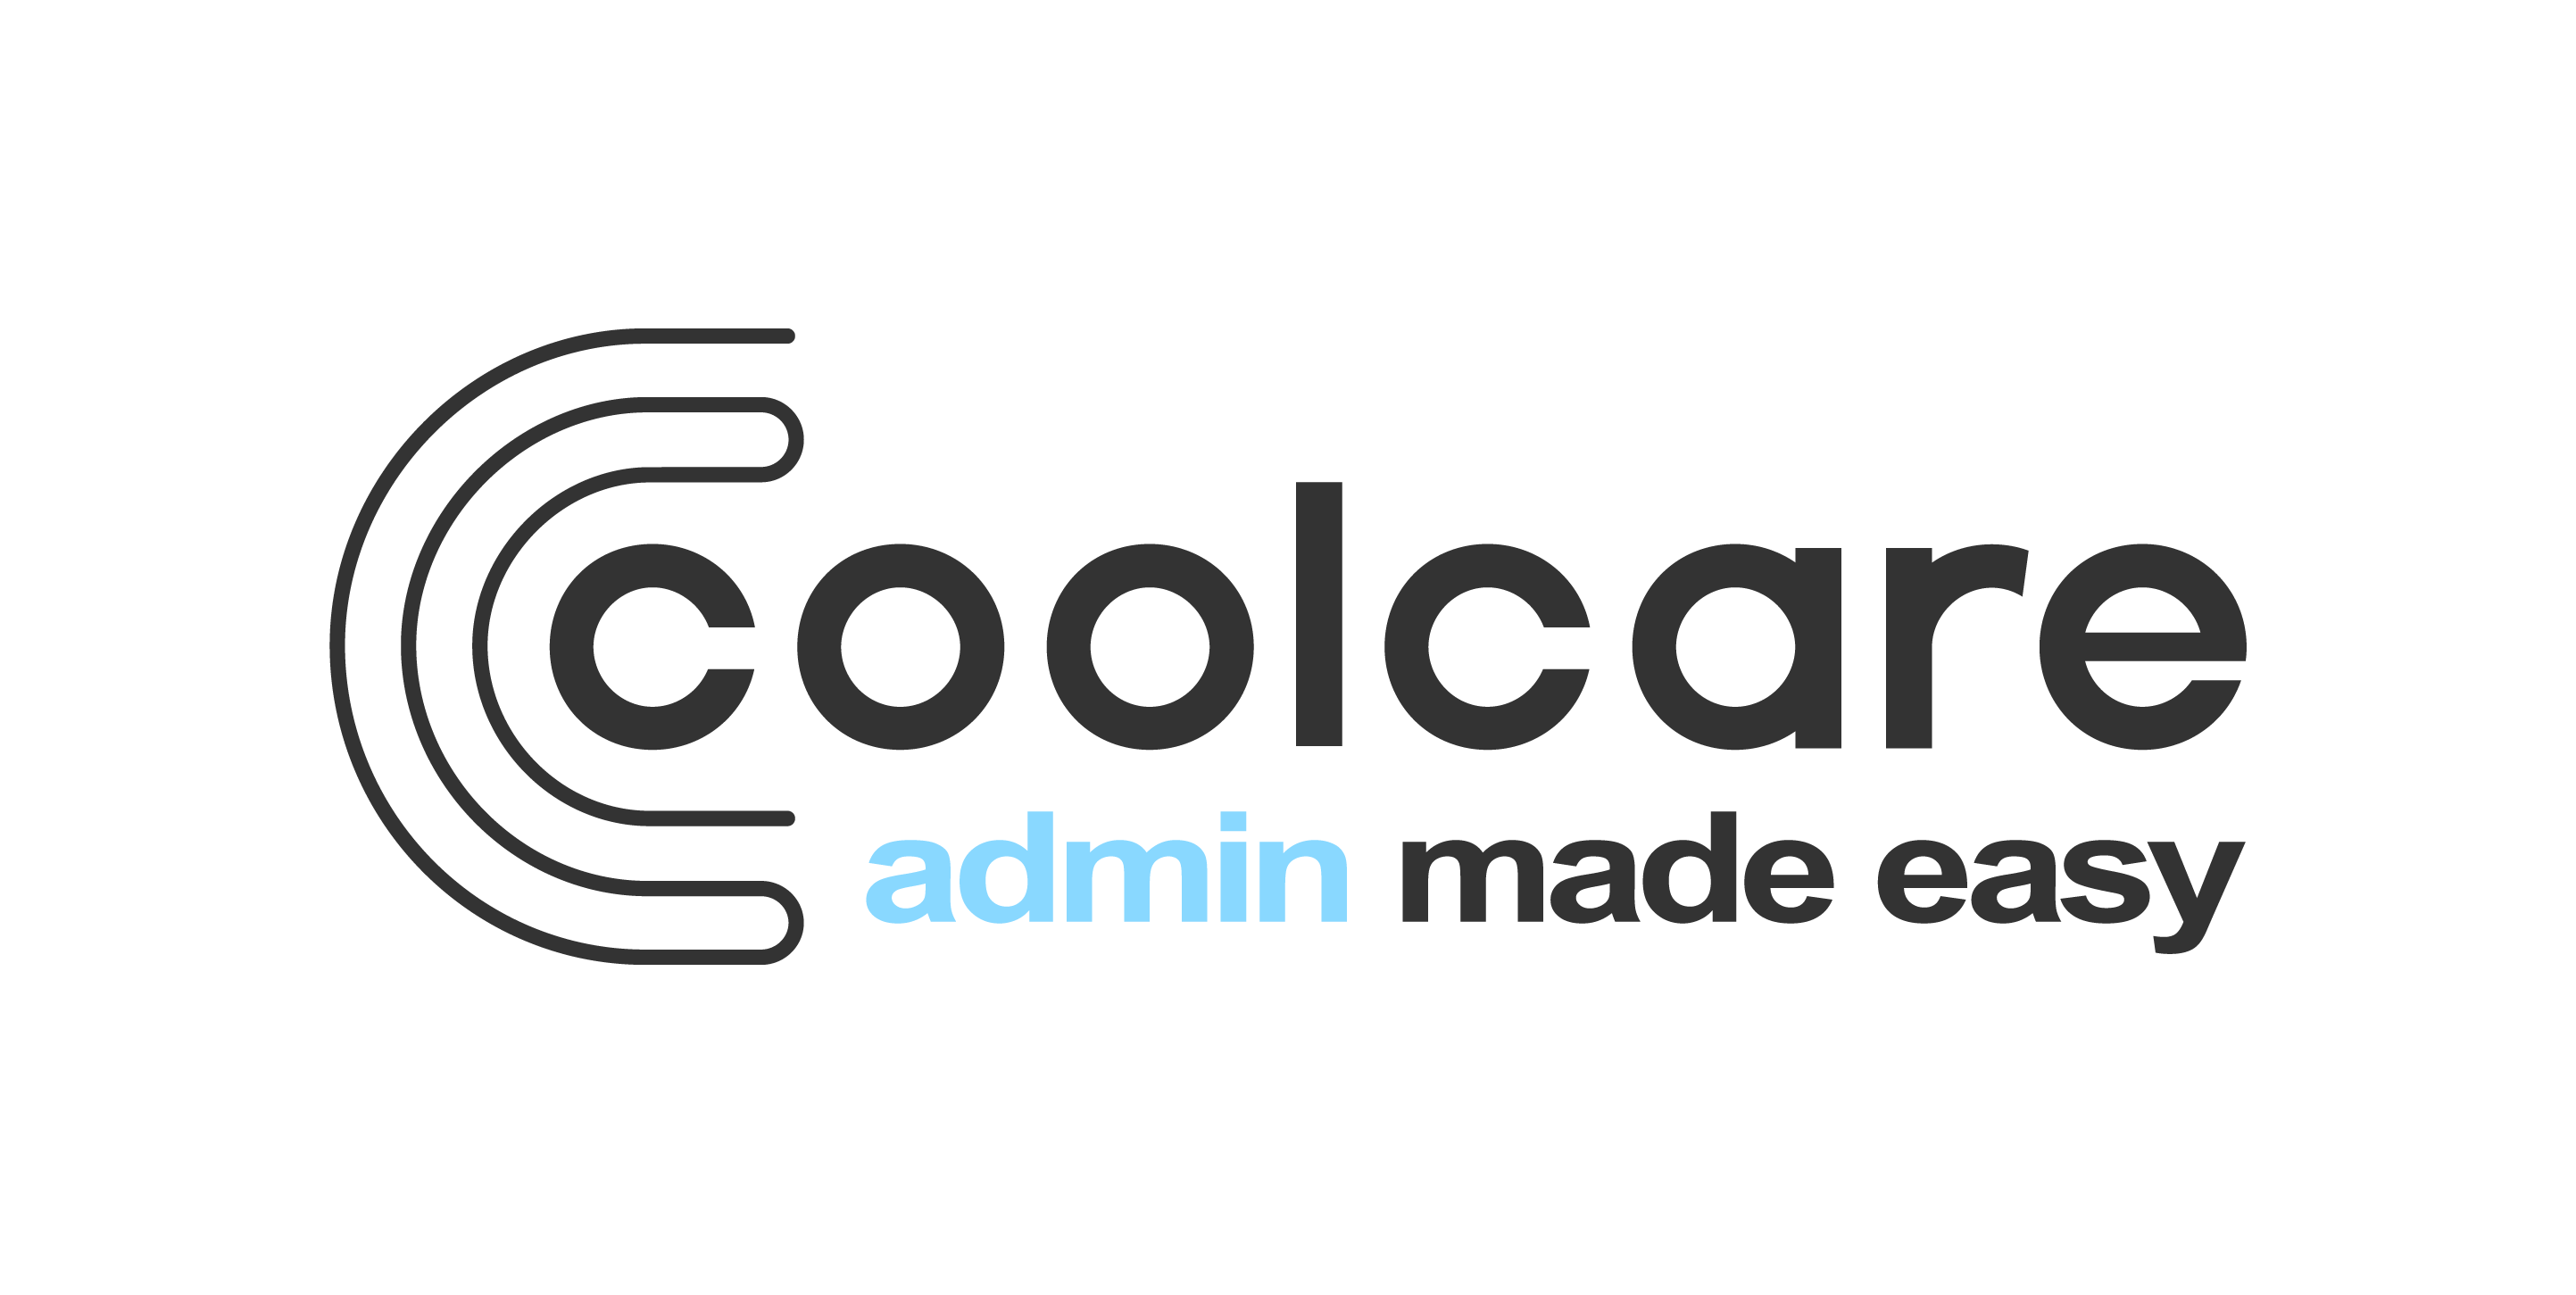 CoolCare